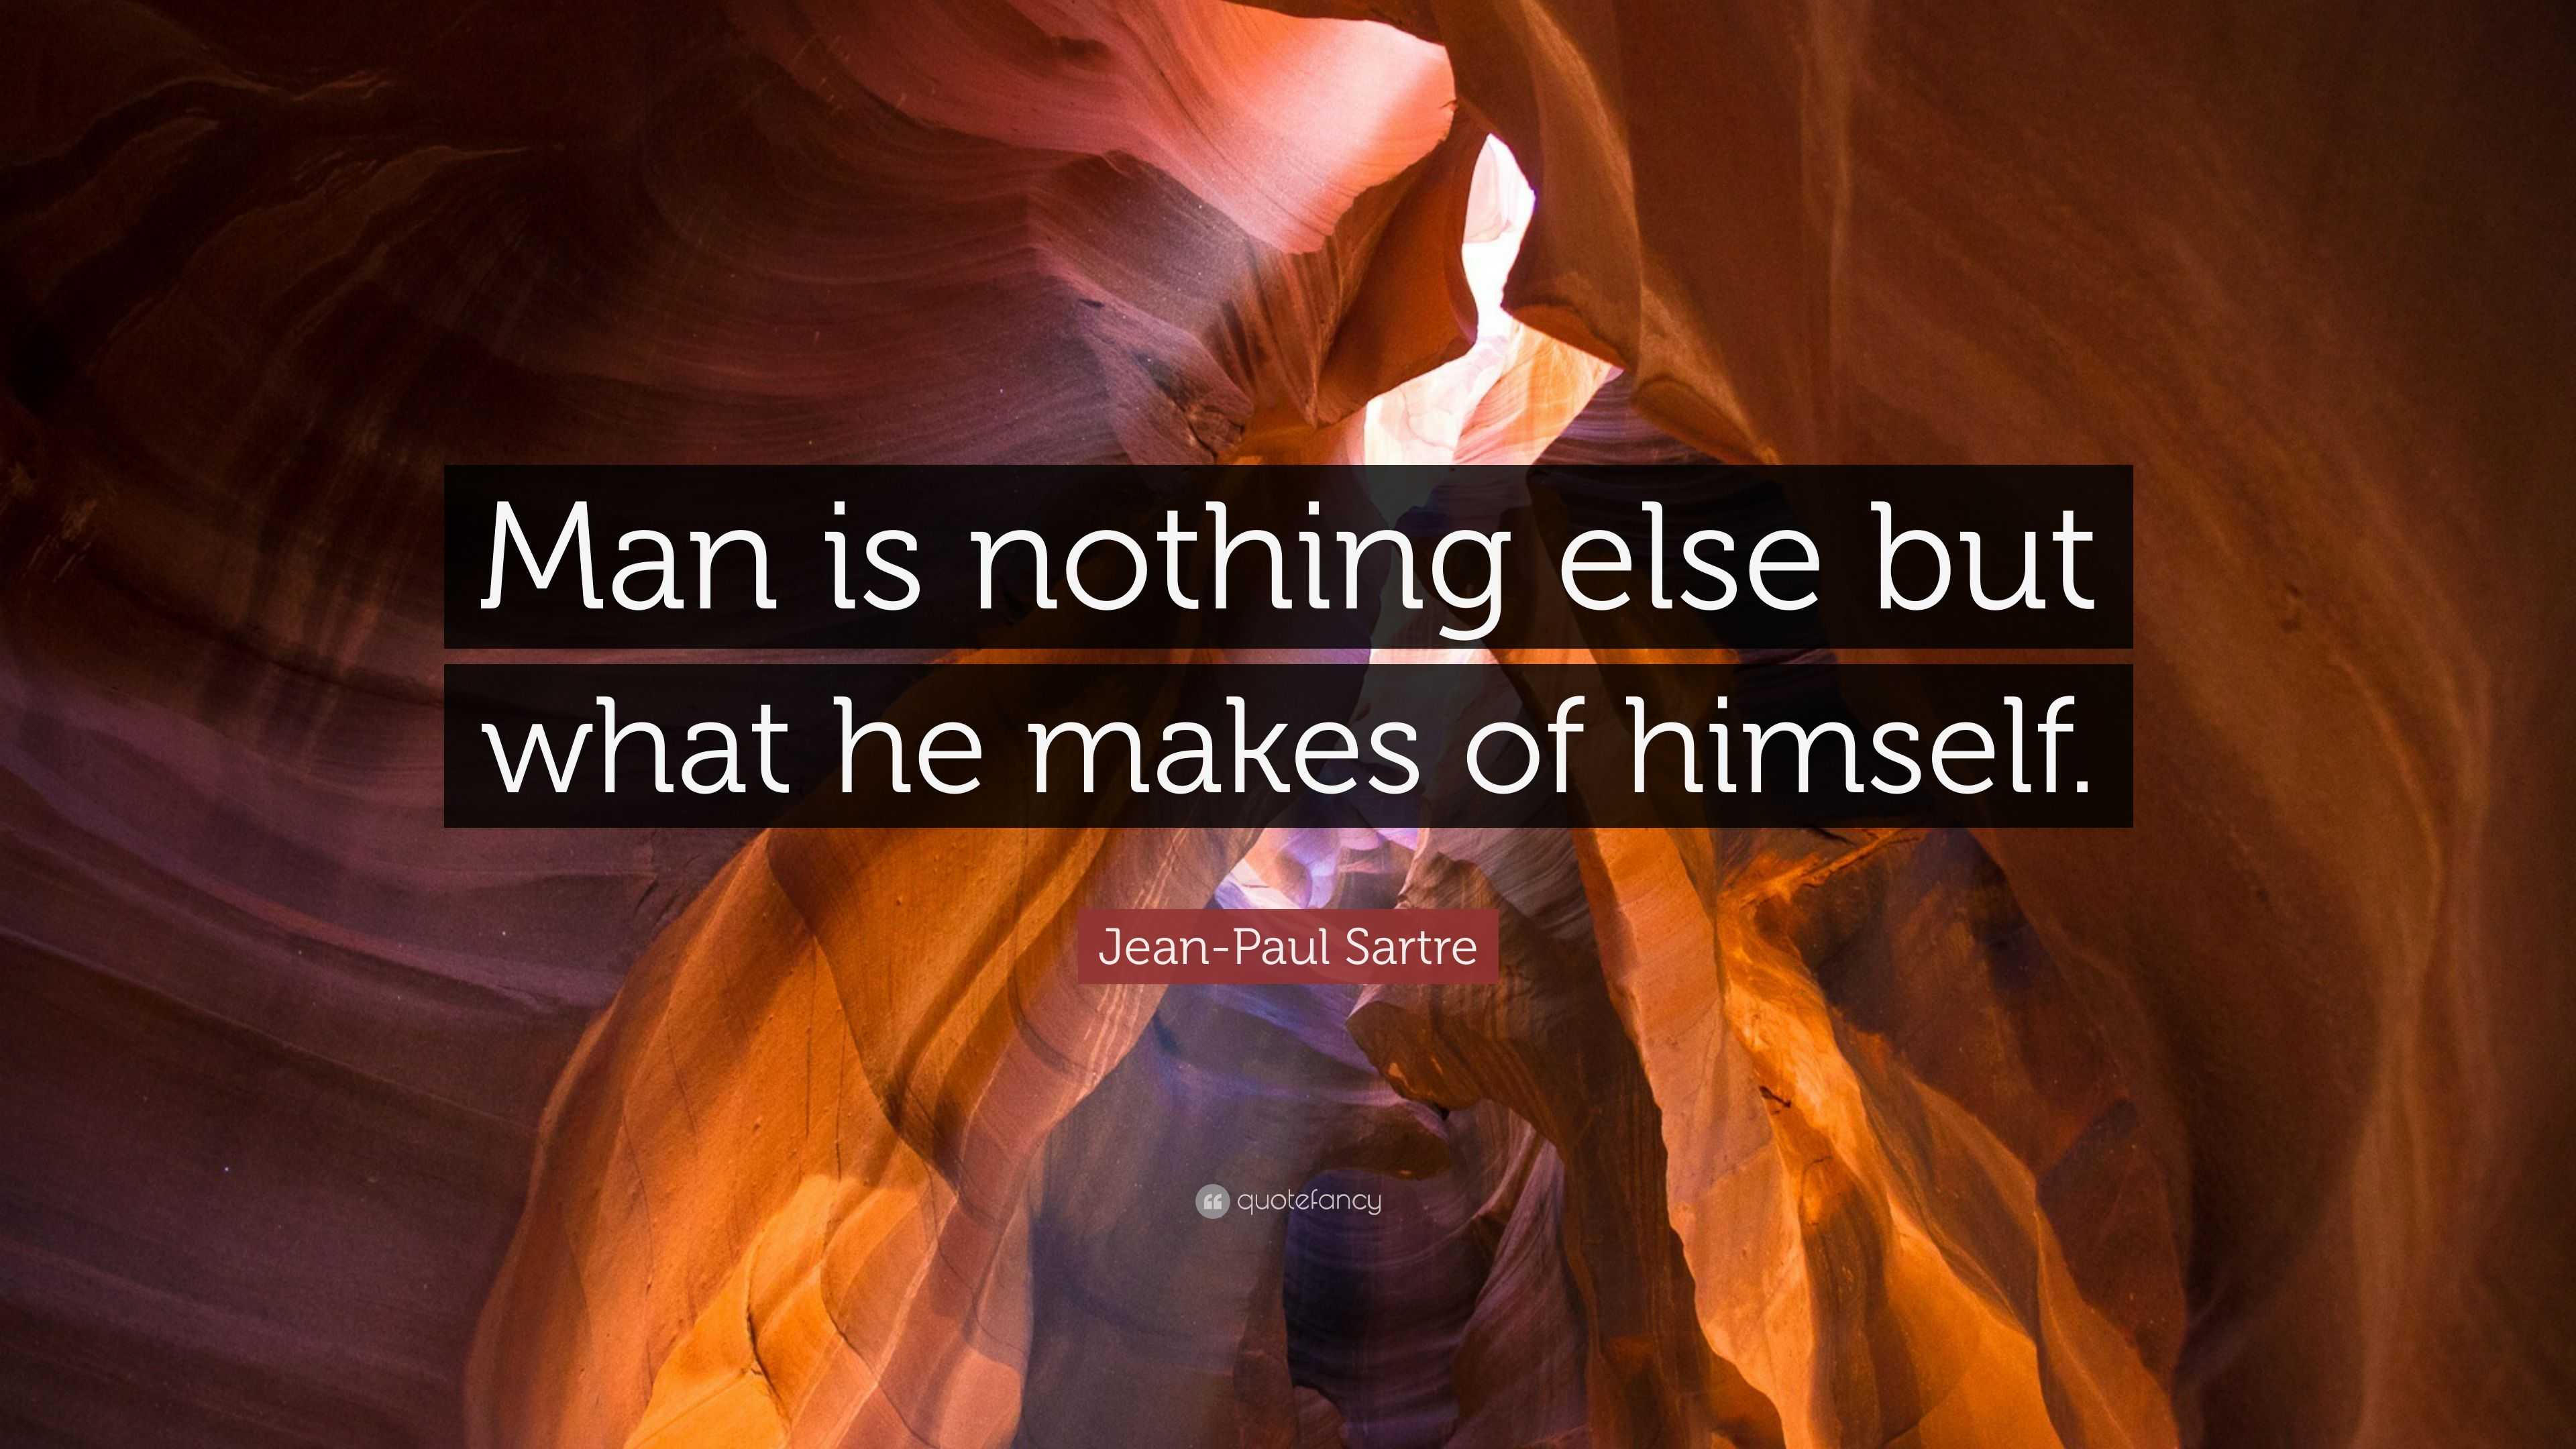 Jean-Paul Sartre Quote: “Man is nothing else but what he makes of himself.”